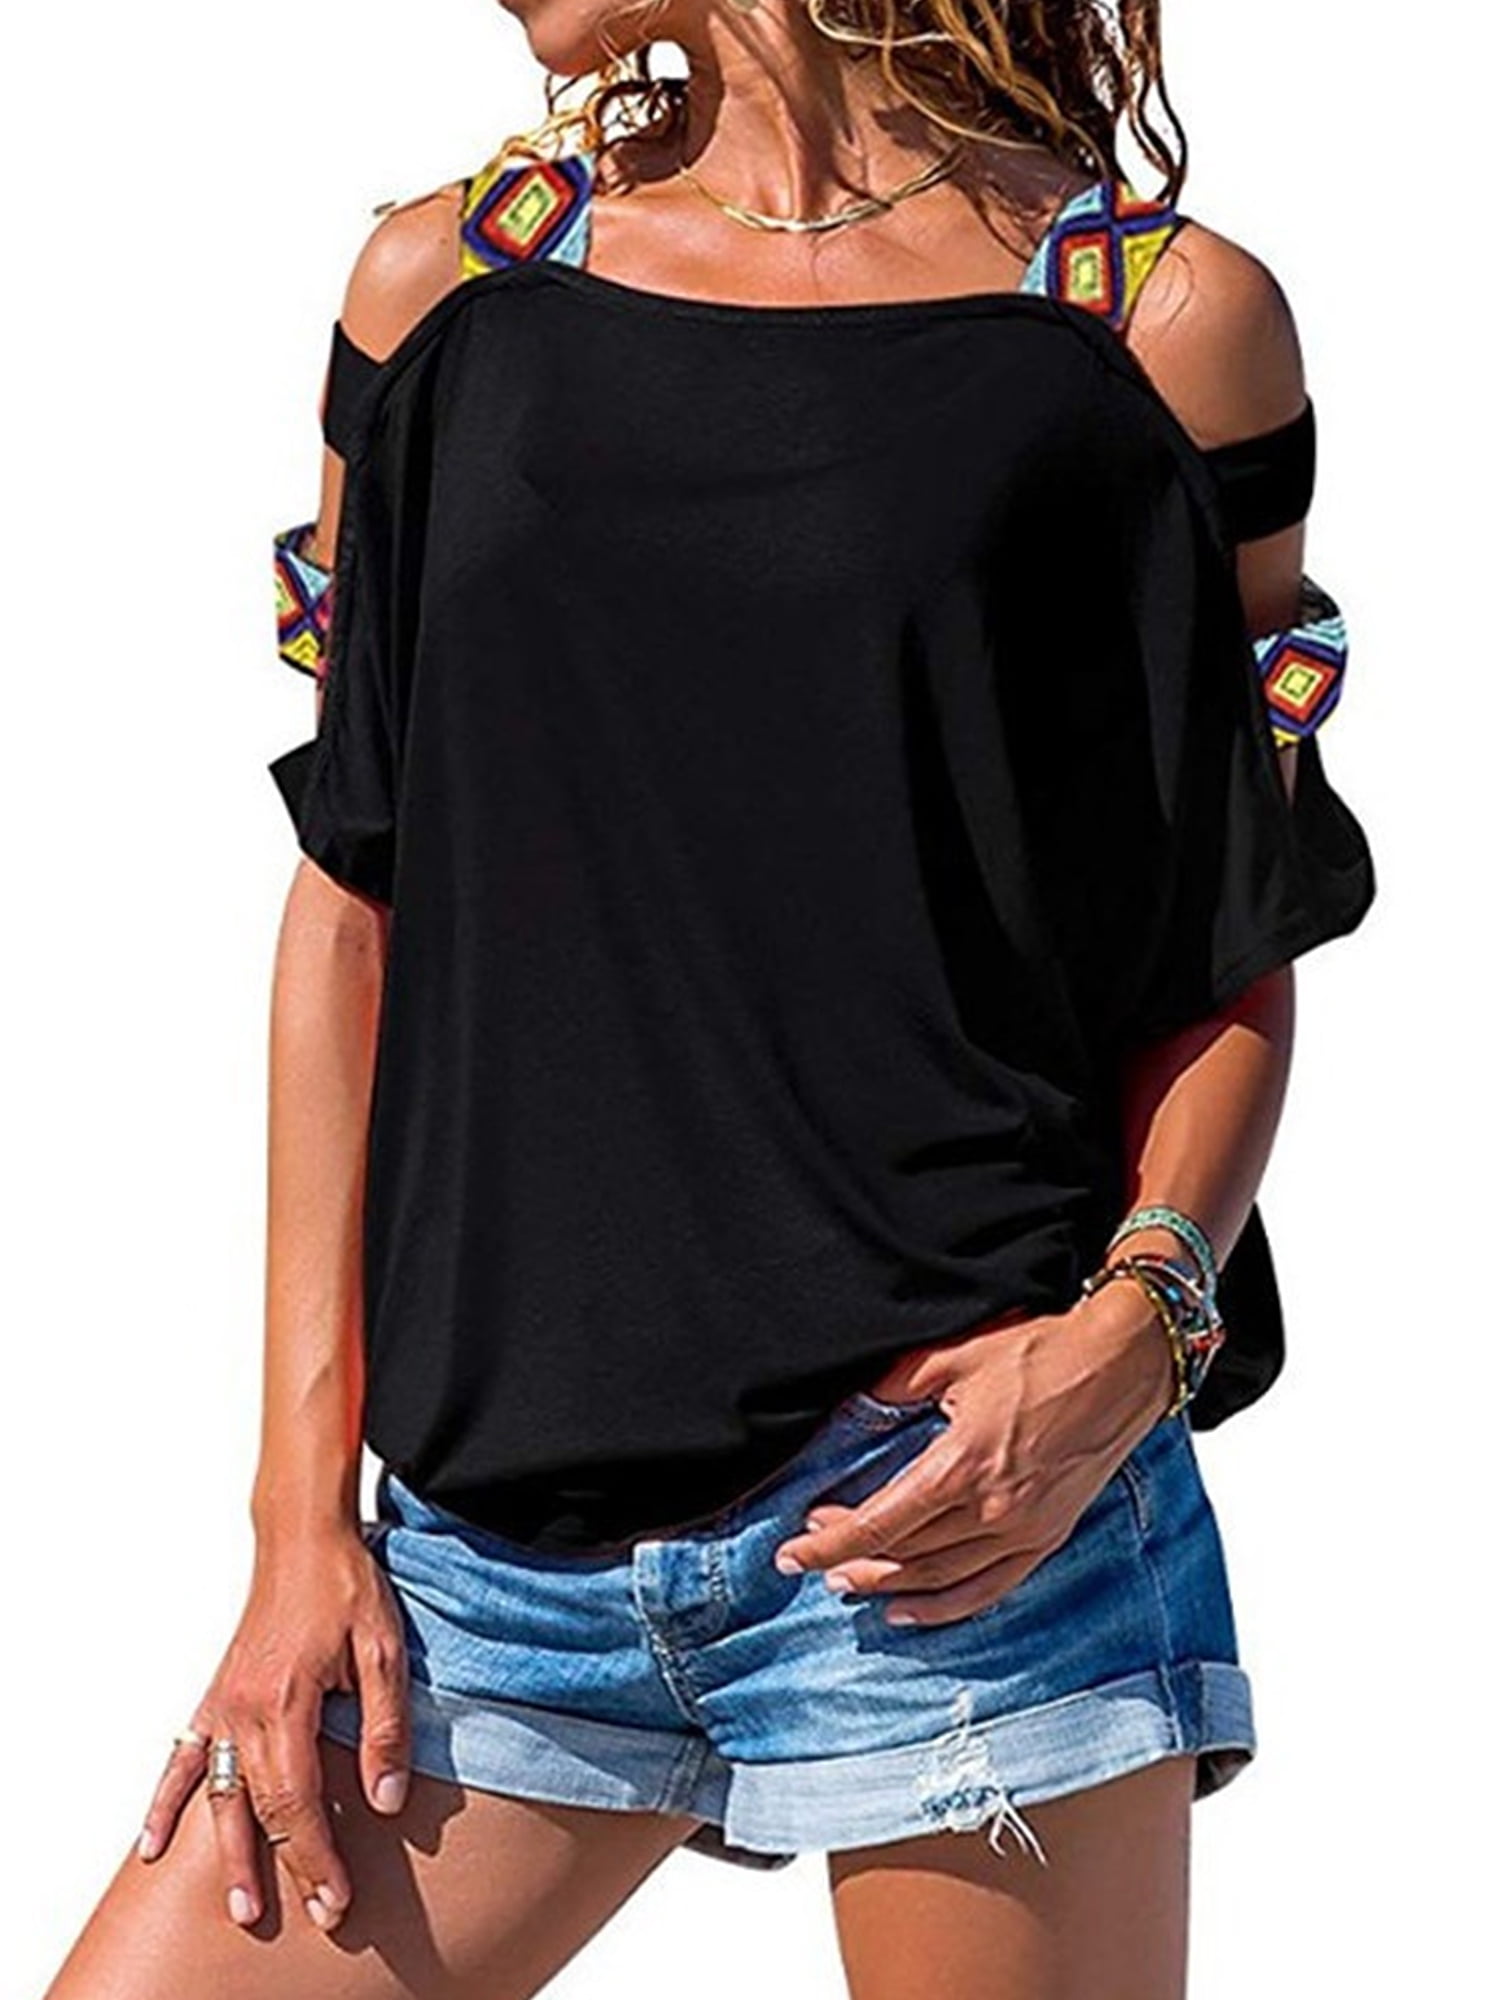 Dressin Women Summer T Shirt Ladies Short Sleeve Strappy Cold Shoulder T-Shirt Tops Womens Loose Tops Basic Blouse